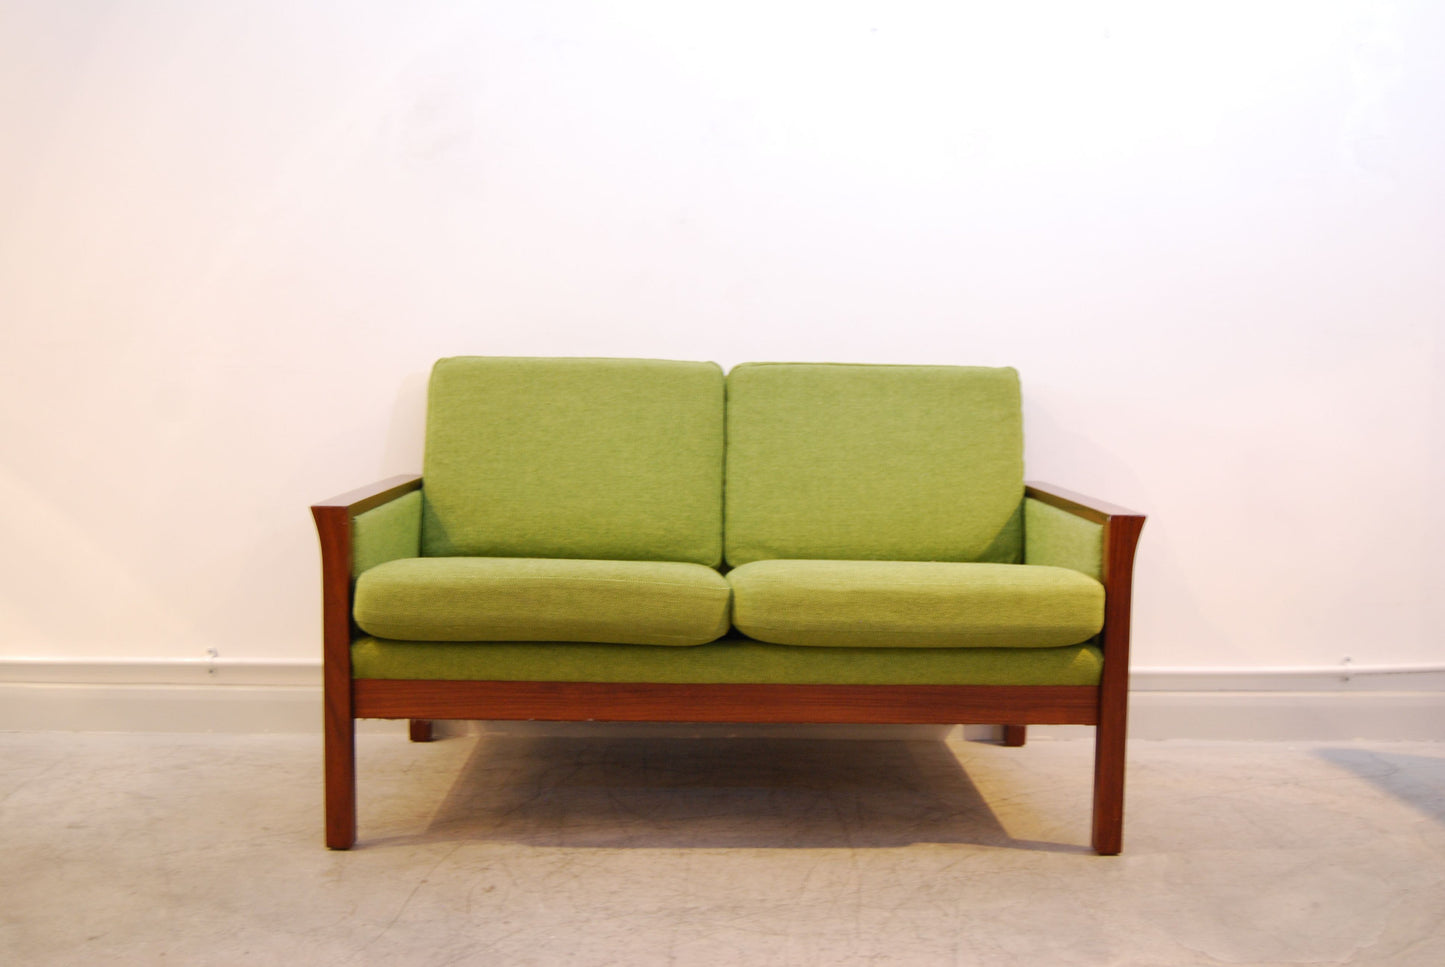 Grass green and teak two seat sofa